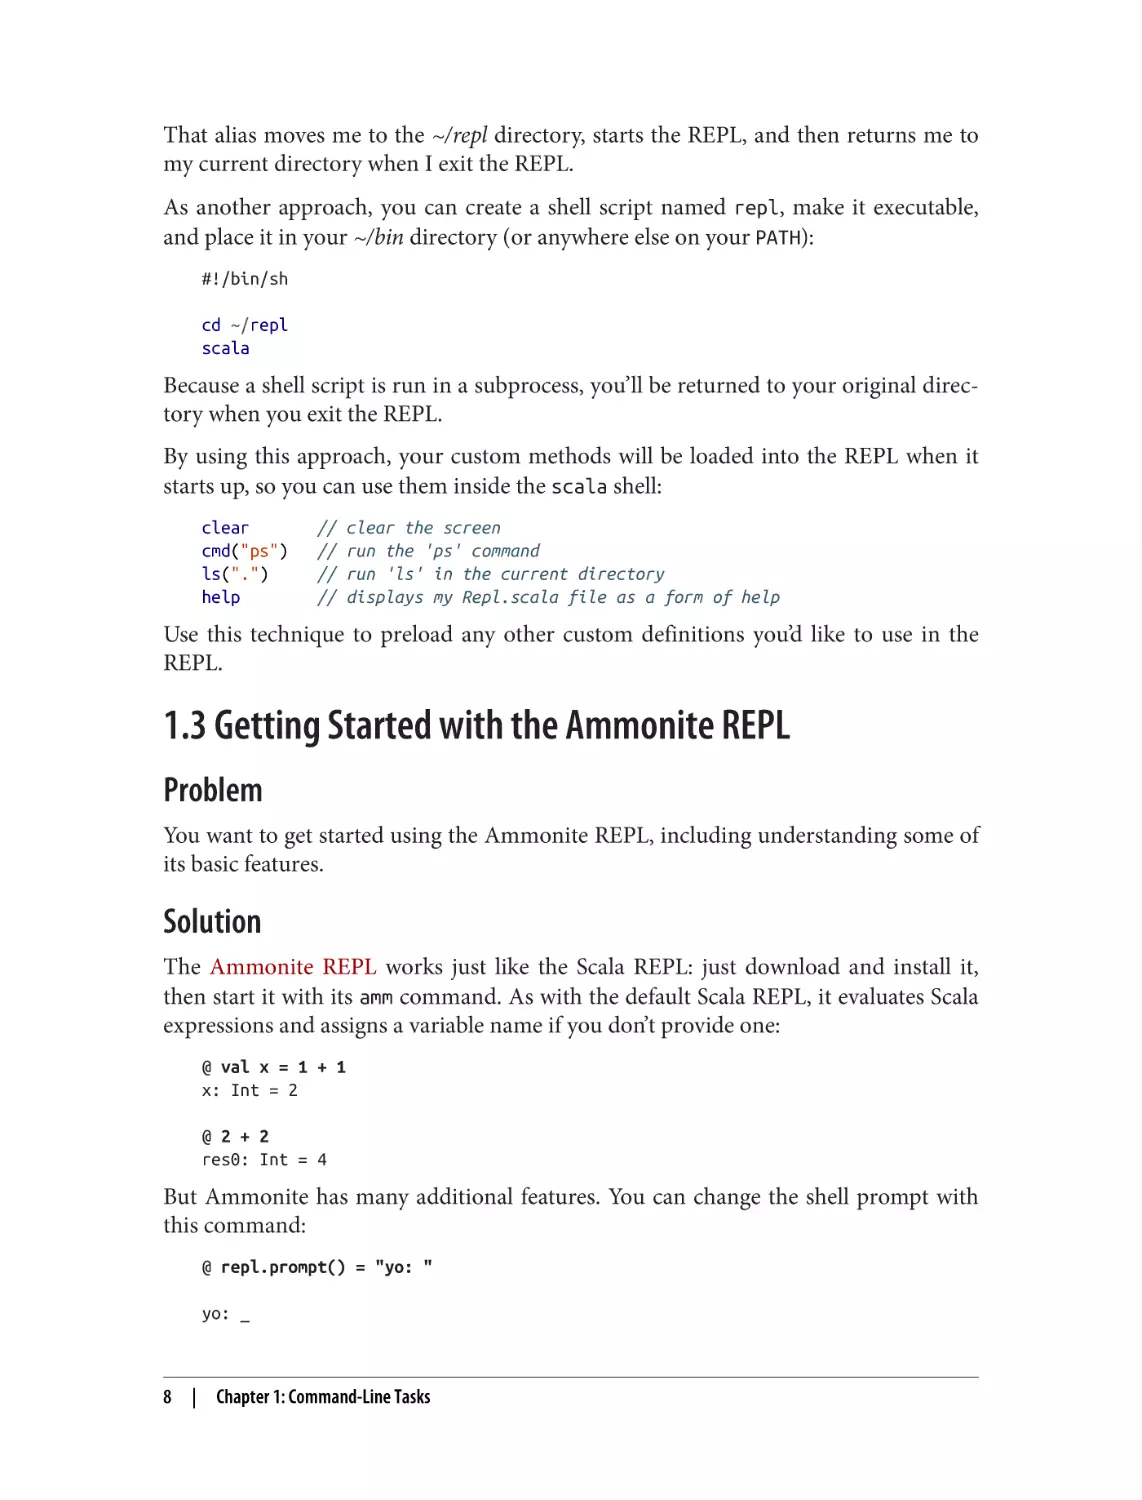 1.3 Getting Started with the Ammonite REPL
Problem
Solution